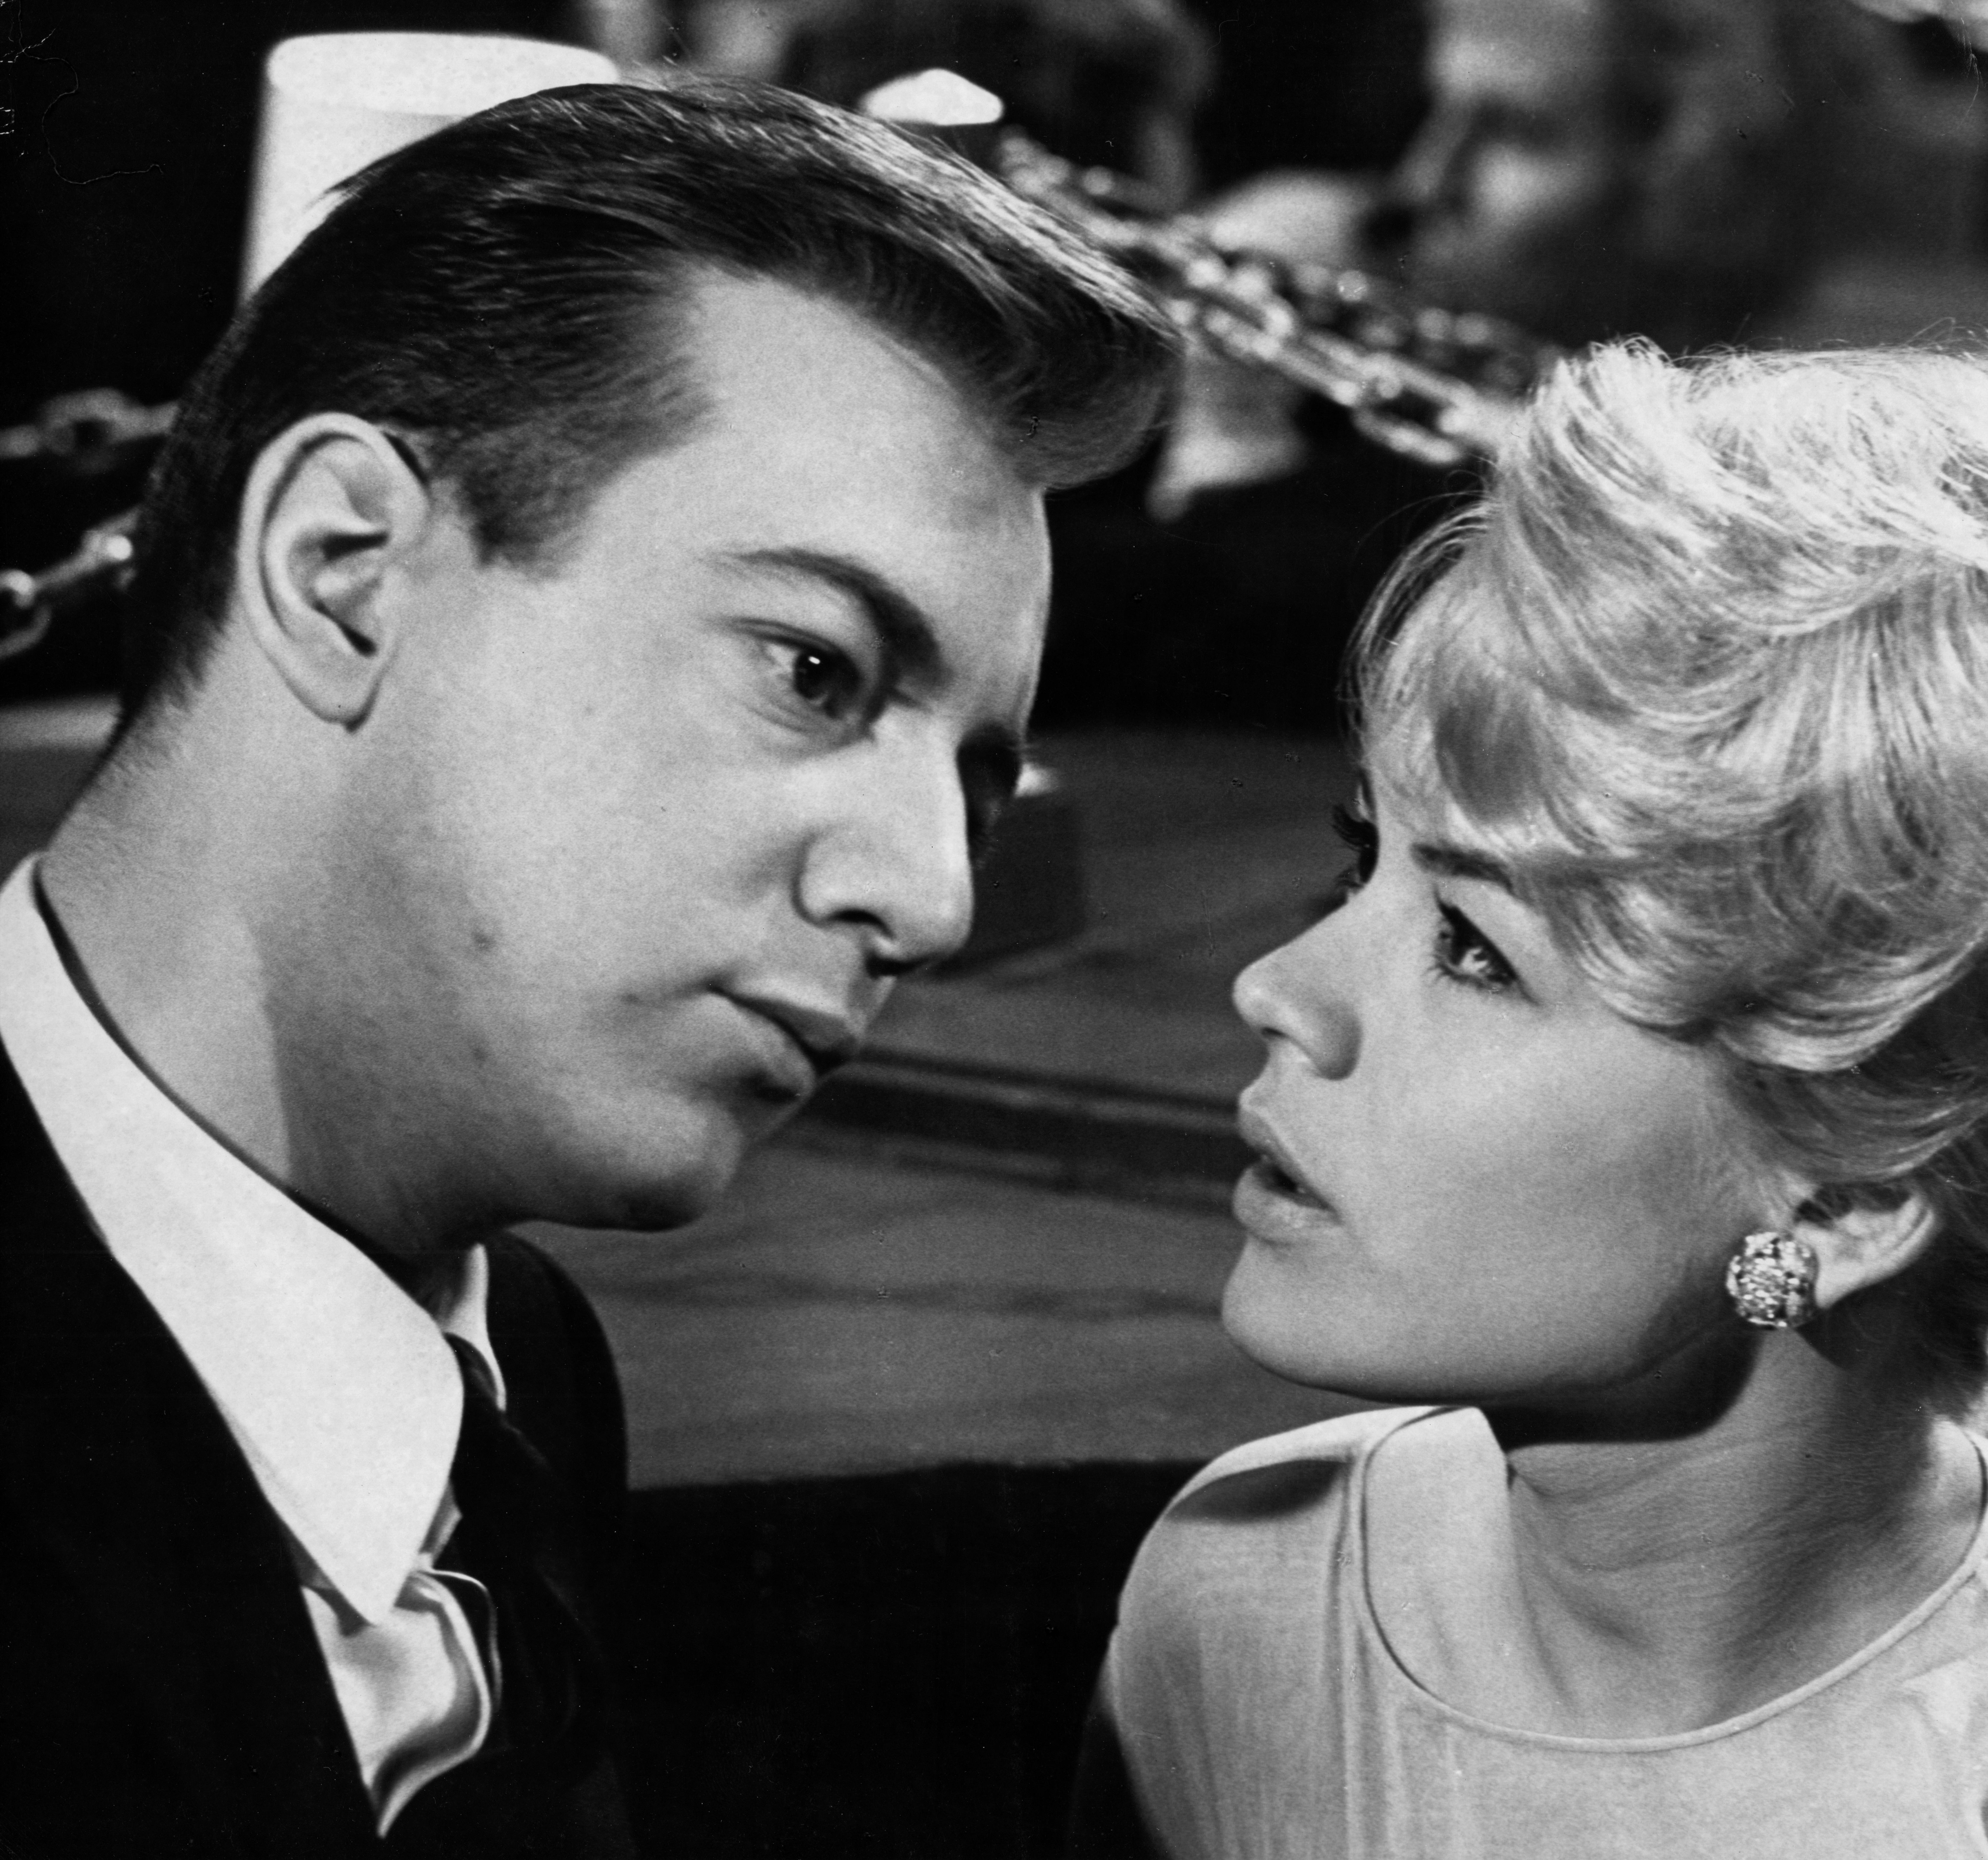 Bobby Darin and Sandra Dee in a scene from "If A Man Answers" in California in 1962 | Source: Getty Images